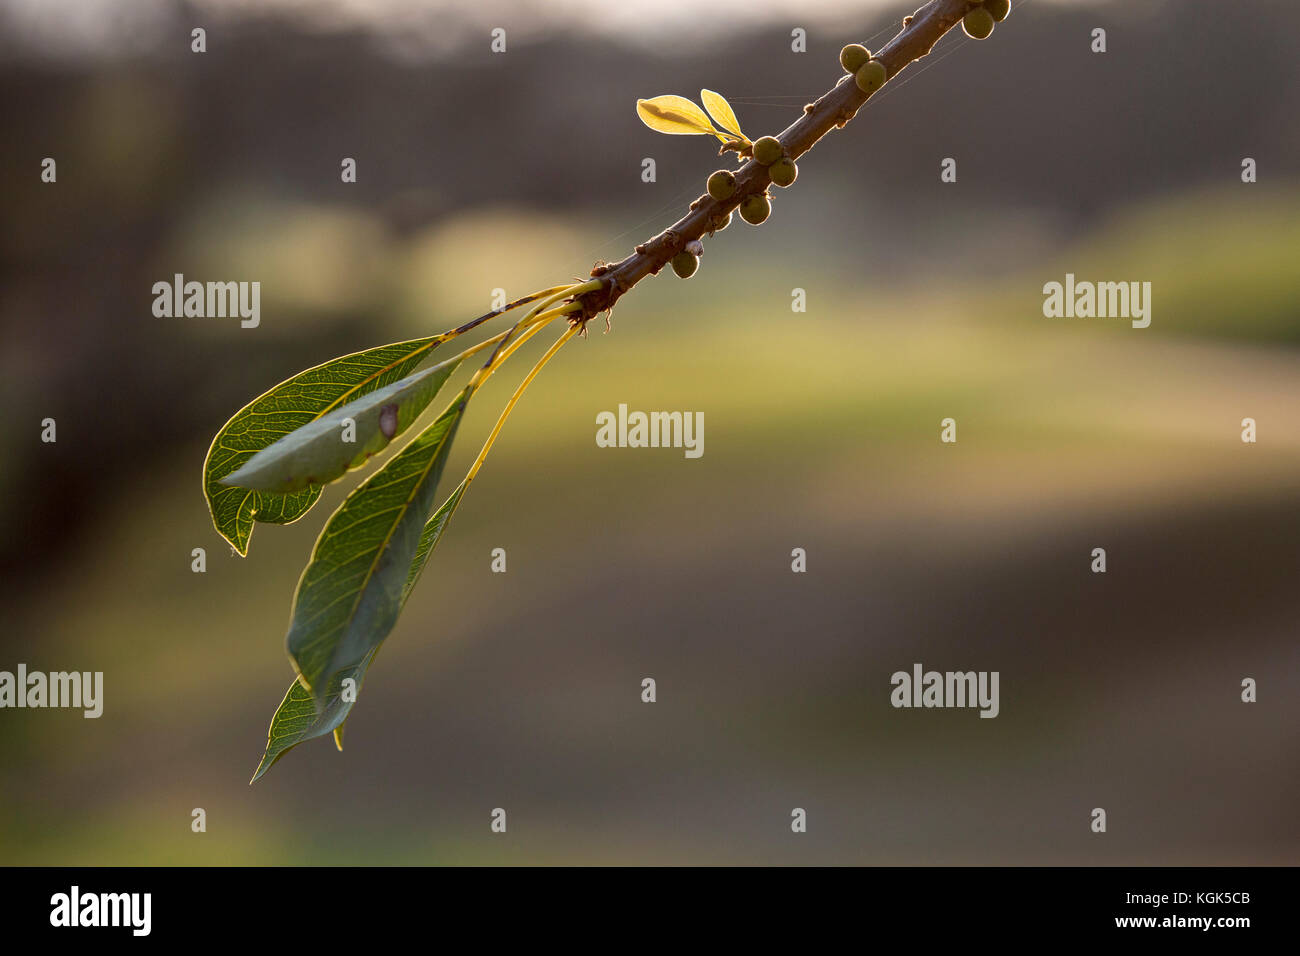 Spring shoots on a fig tree (Ficus thonningii) branchlet Stock Photo